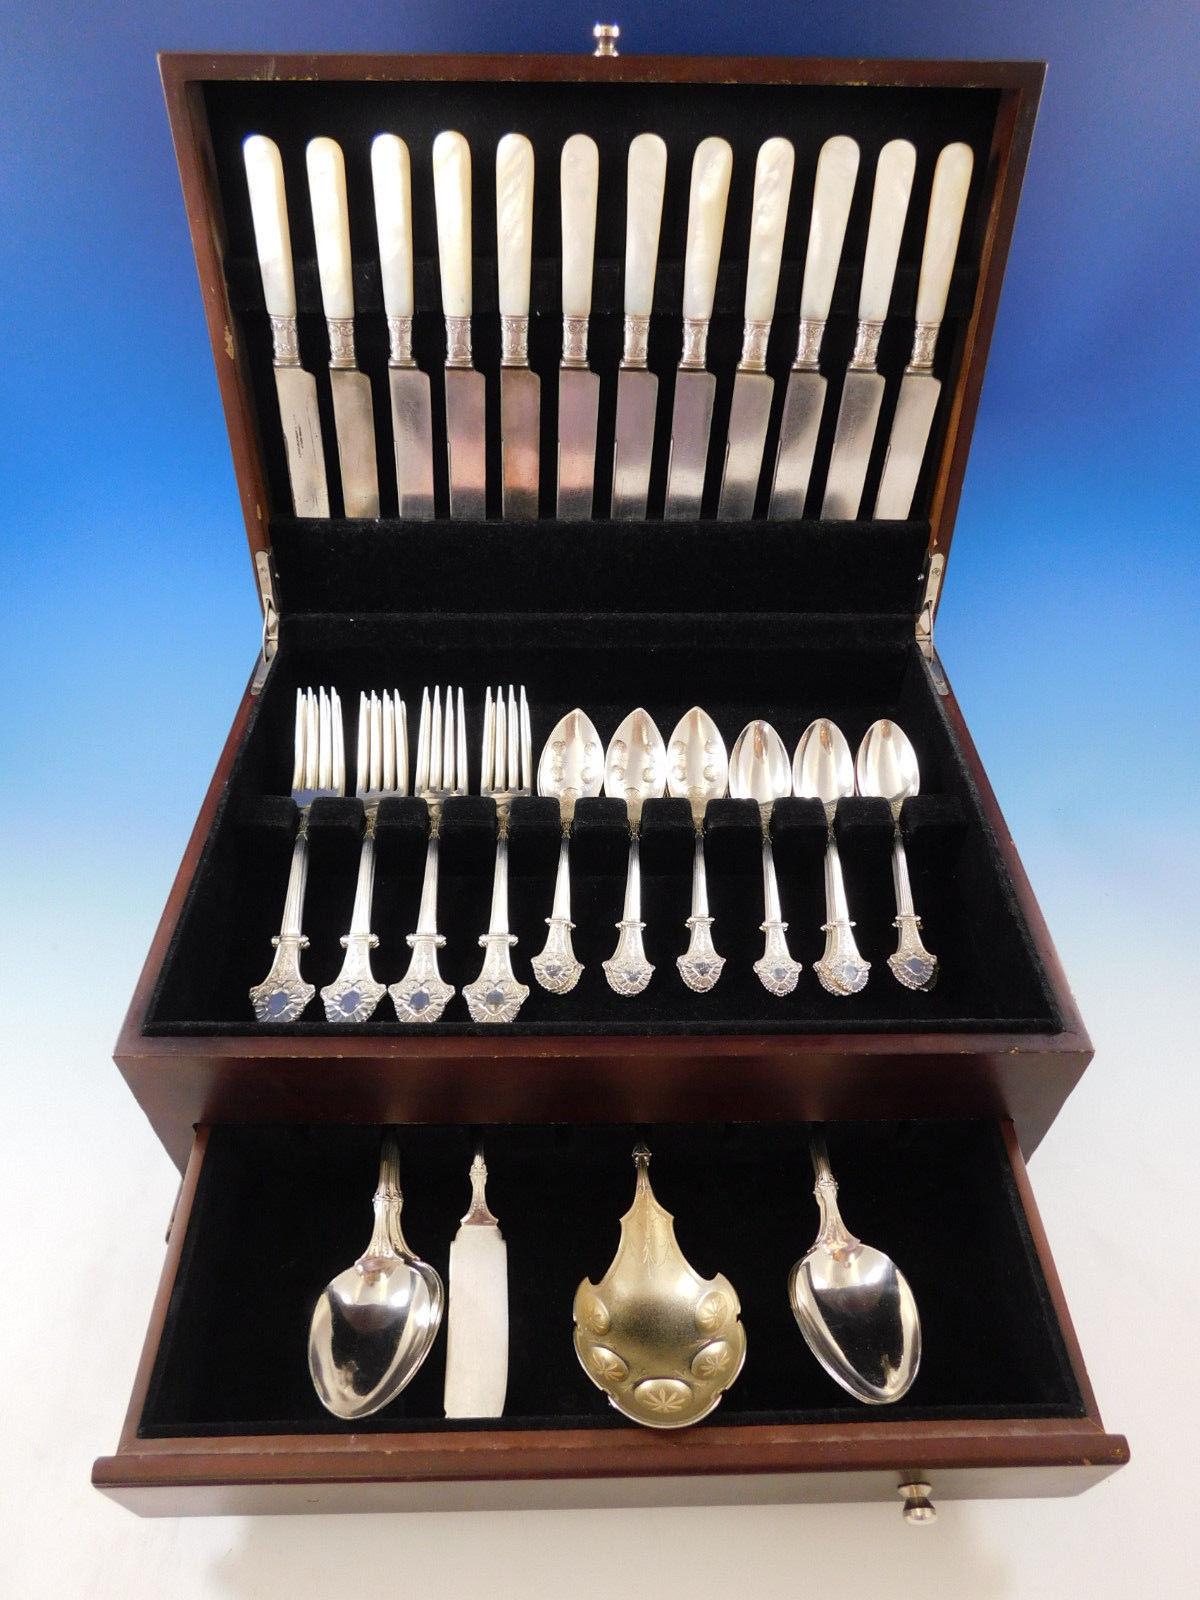 Scarce Louis XIV by Gorham sterling silver and mother-of-pearl flatware set of 56 pieces. This set includes:

12 mother-of-pearl handle knives with sterling collars, 9